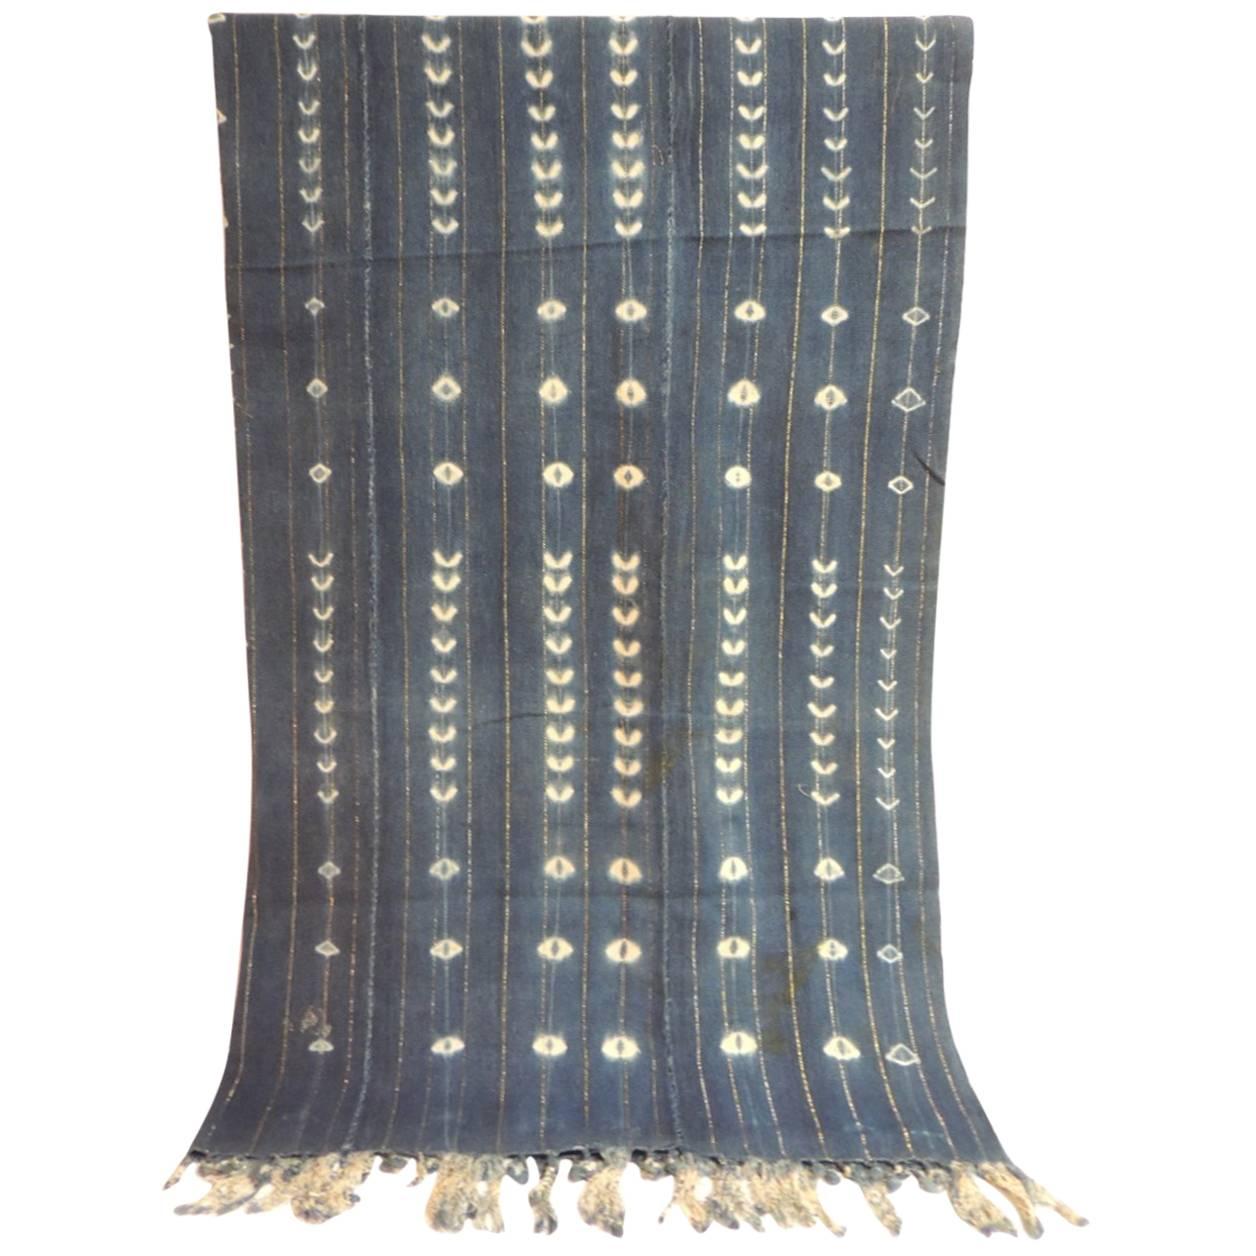 Vintage African Yoruba reversible cloth
African Yoruba vintage reversible cloth. West Africa Yoruba cloth. The Yoruba are masters of the indigo-dyeing process. They also have the most varied methods of applying resists to cloth. Yoruba women fold